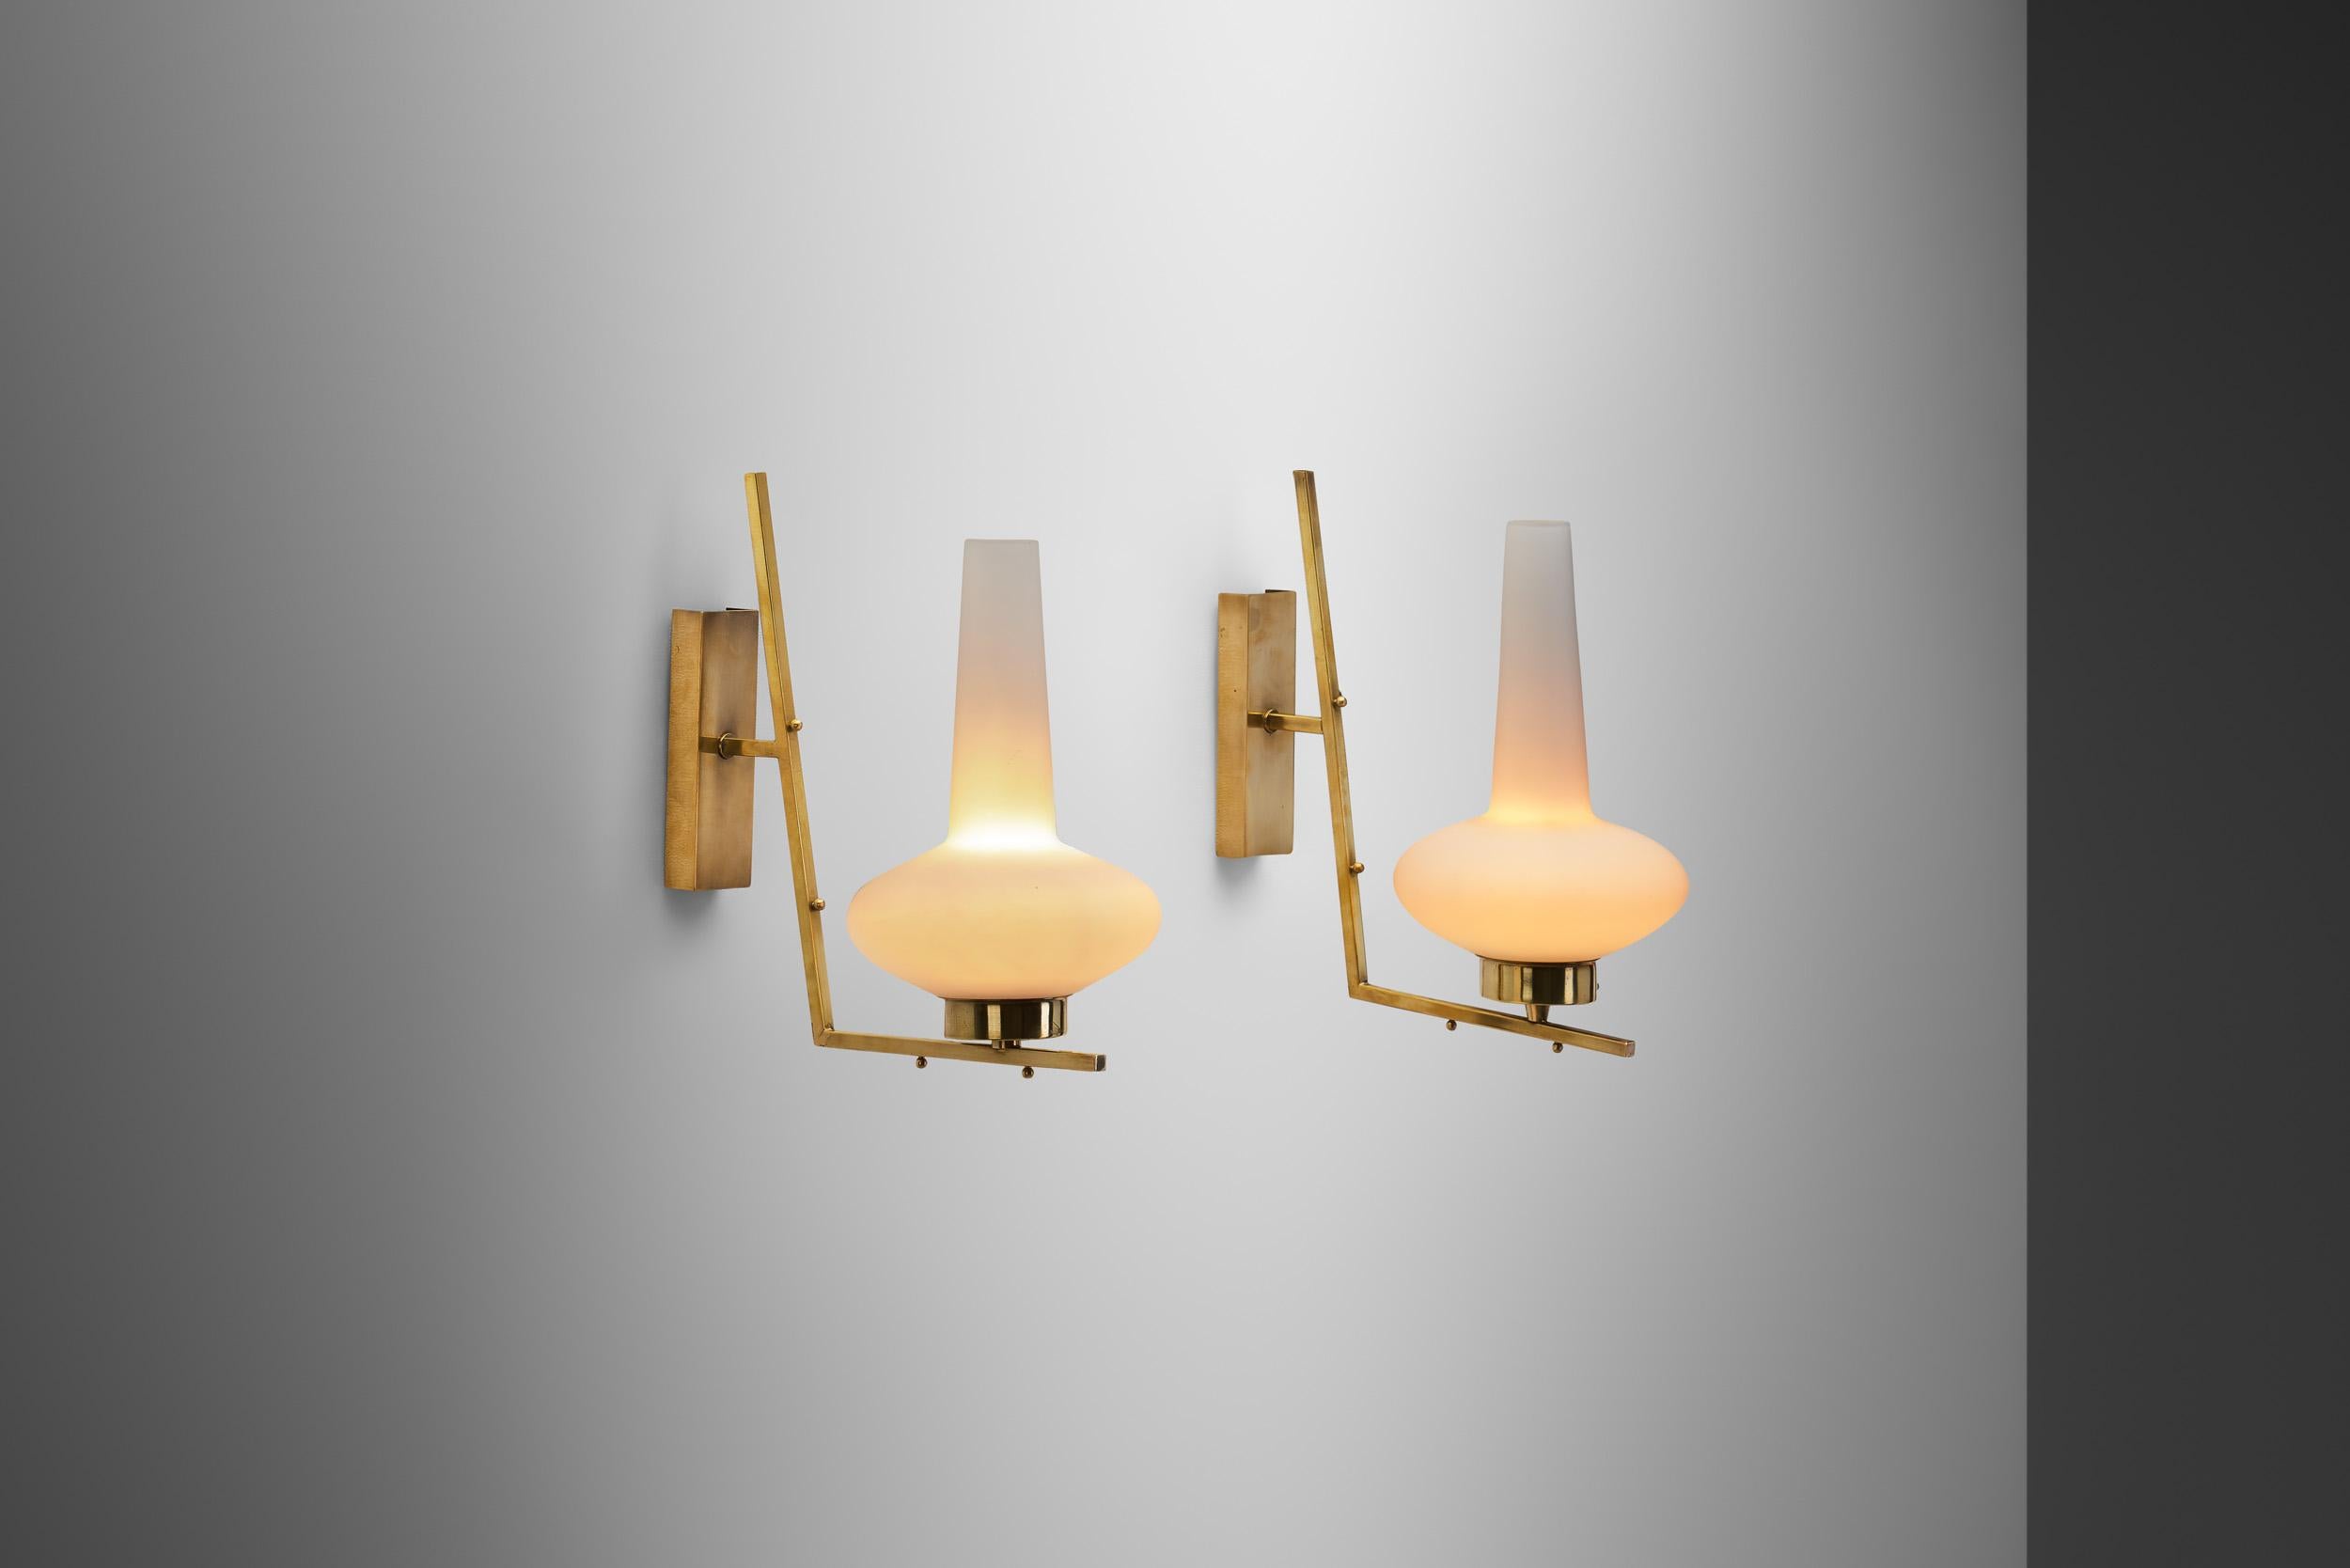 Italian Mid-20th Century lighting design was infinitely captivating, featuring one-of-a-kind models crafted by renowned Italian designers such as Ettore Sottsass, Gio Ponti, Gavina and other internationally esteemed names. As these wall lamps show,